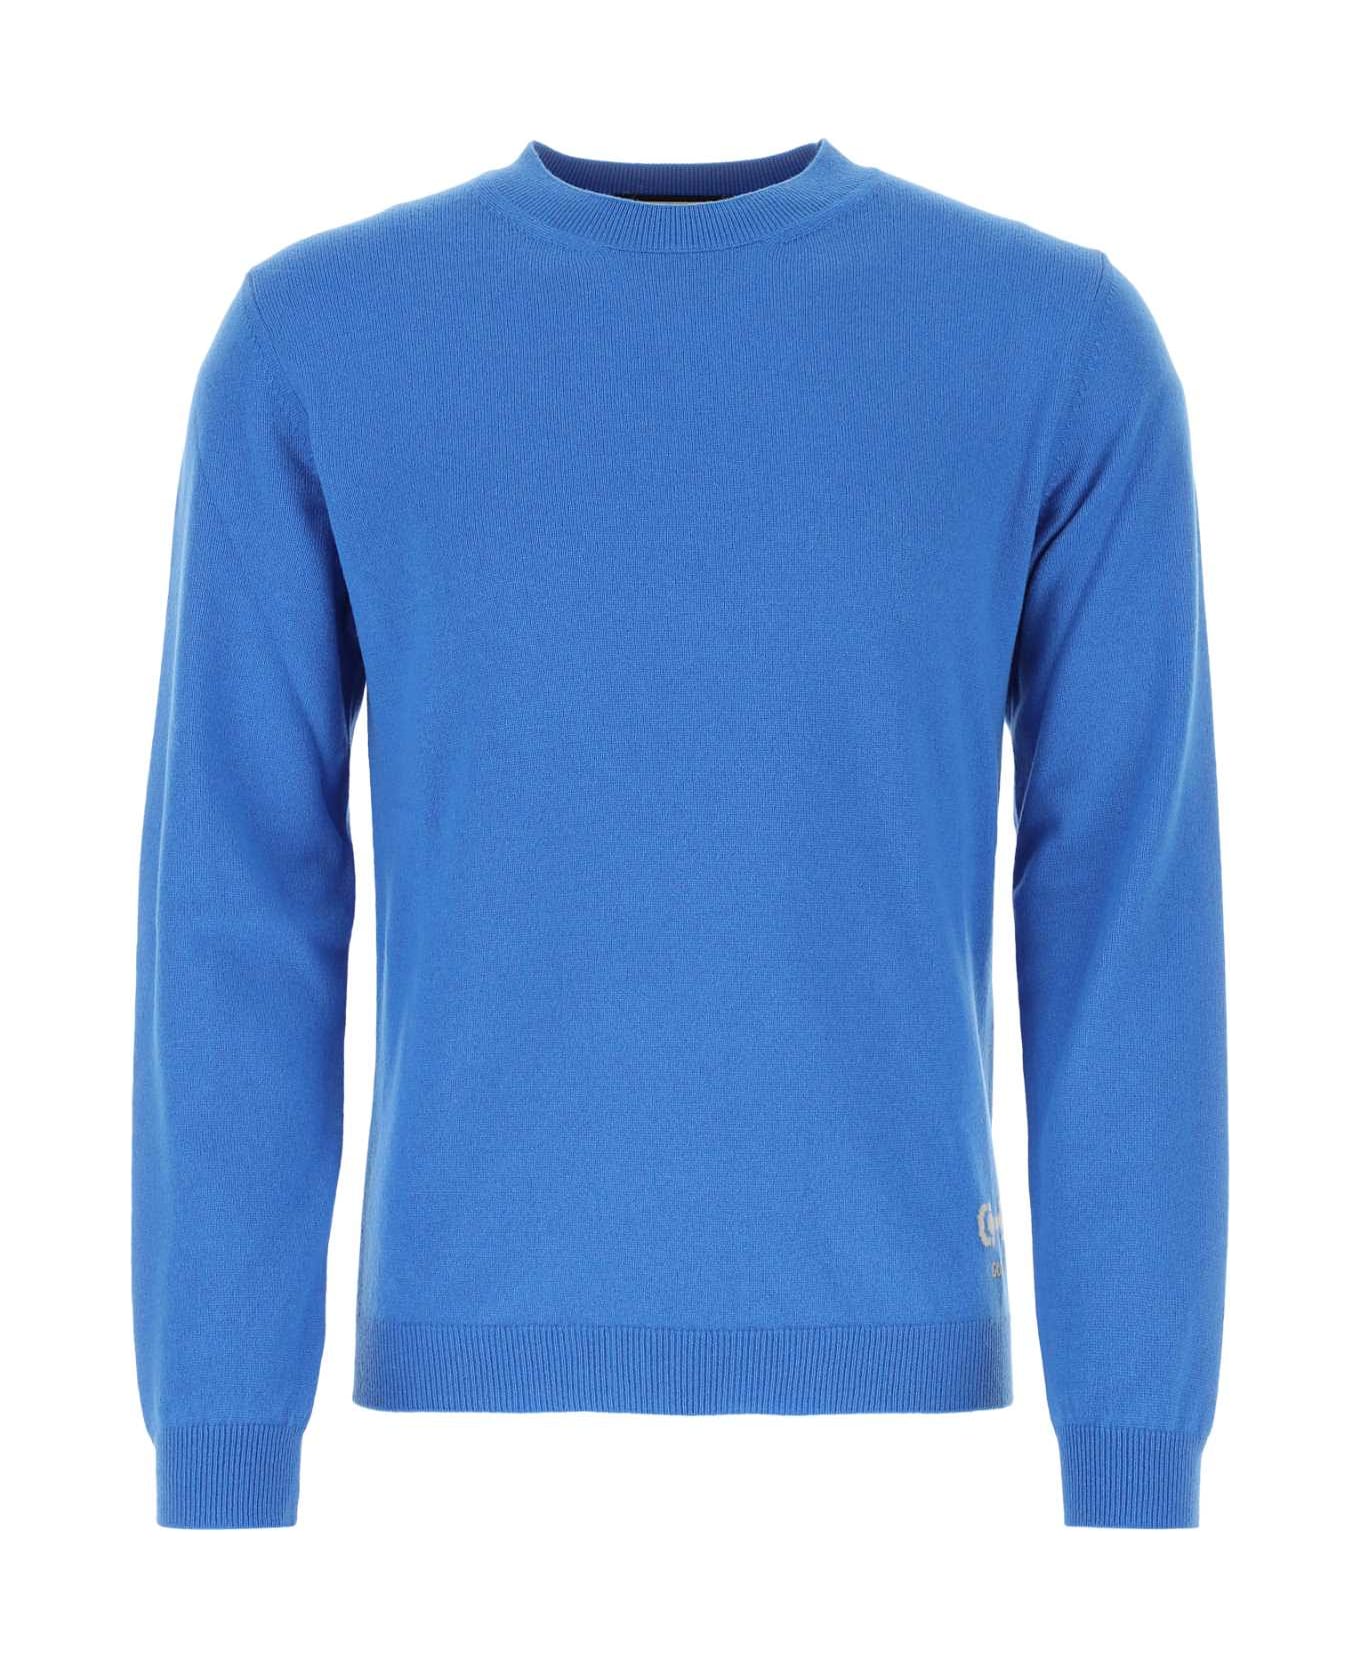 Gucci Turquoise Cashmere Sweater - Blue ニットウェア